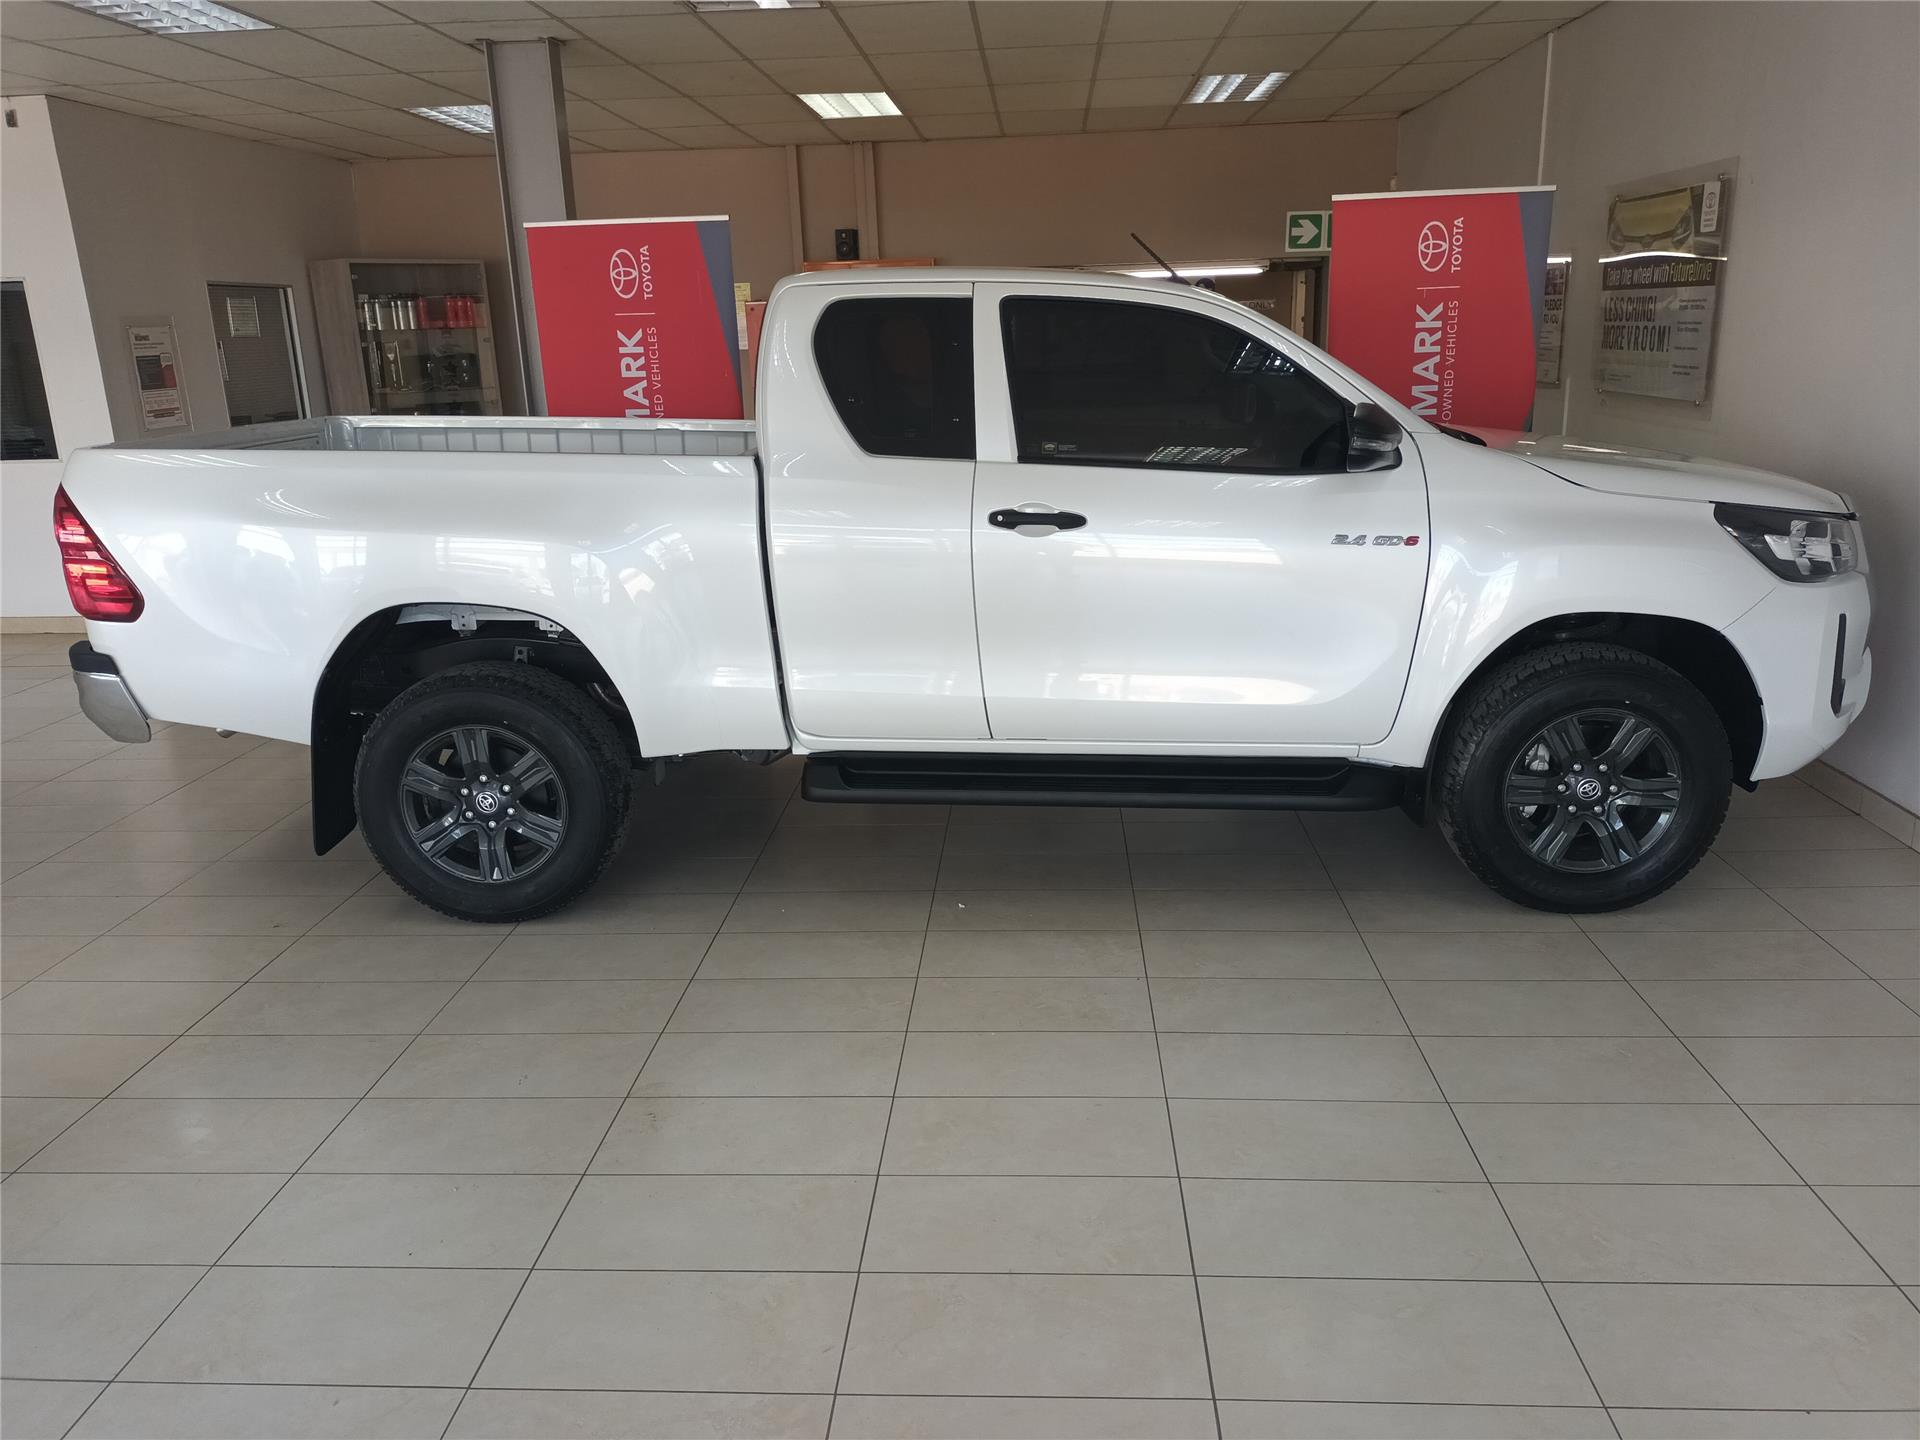 Demo 2023 Toyota Hilux Xtra Cab for sale in Hartswater Northern Cape ...